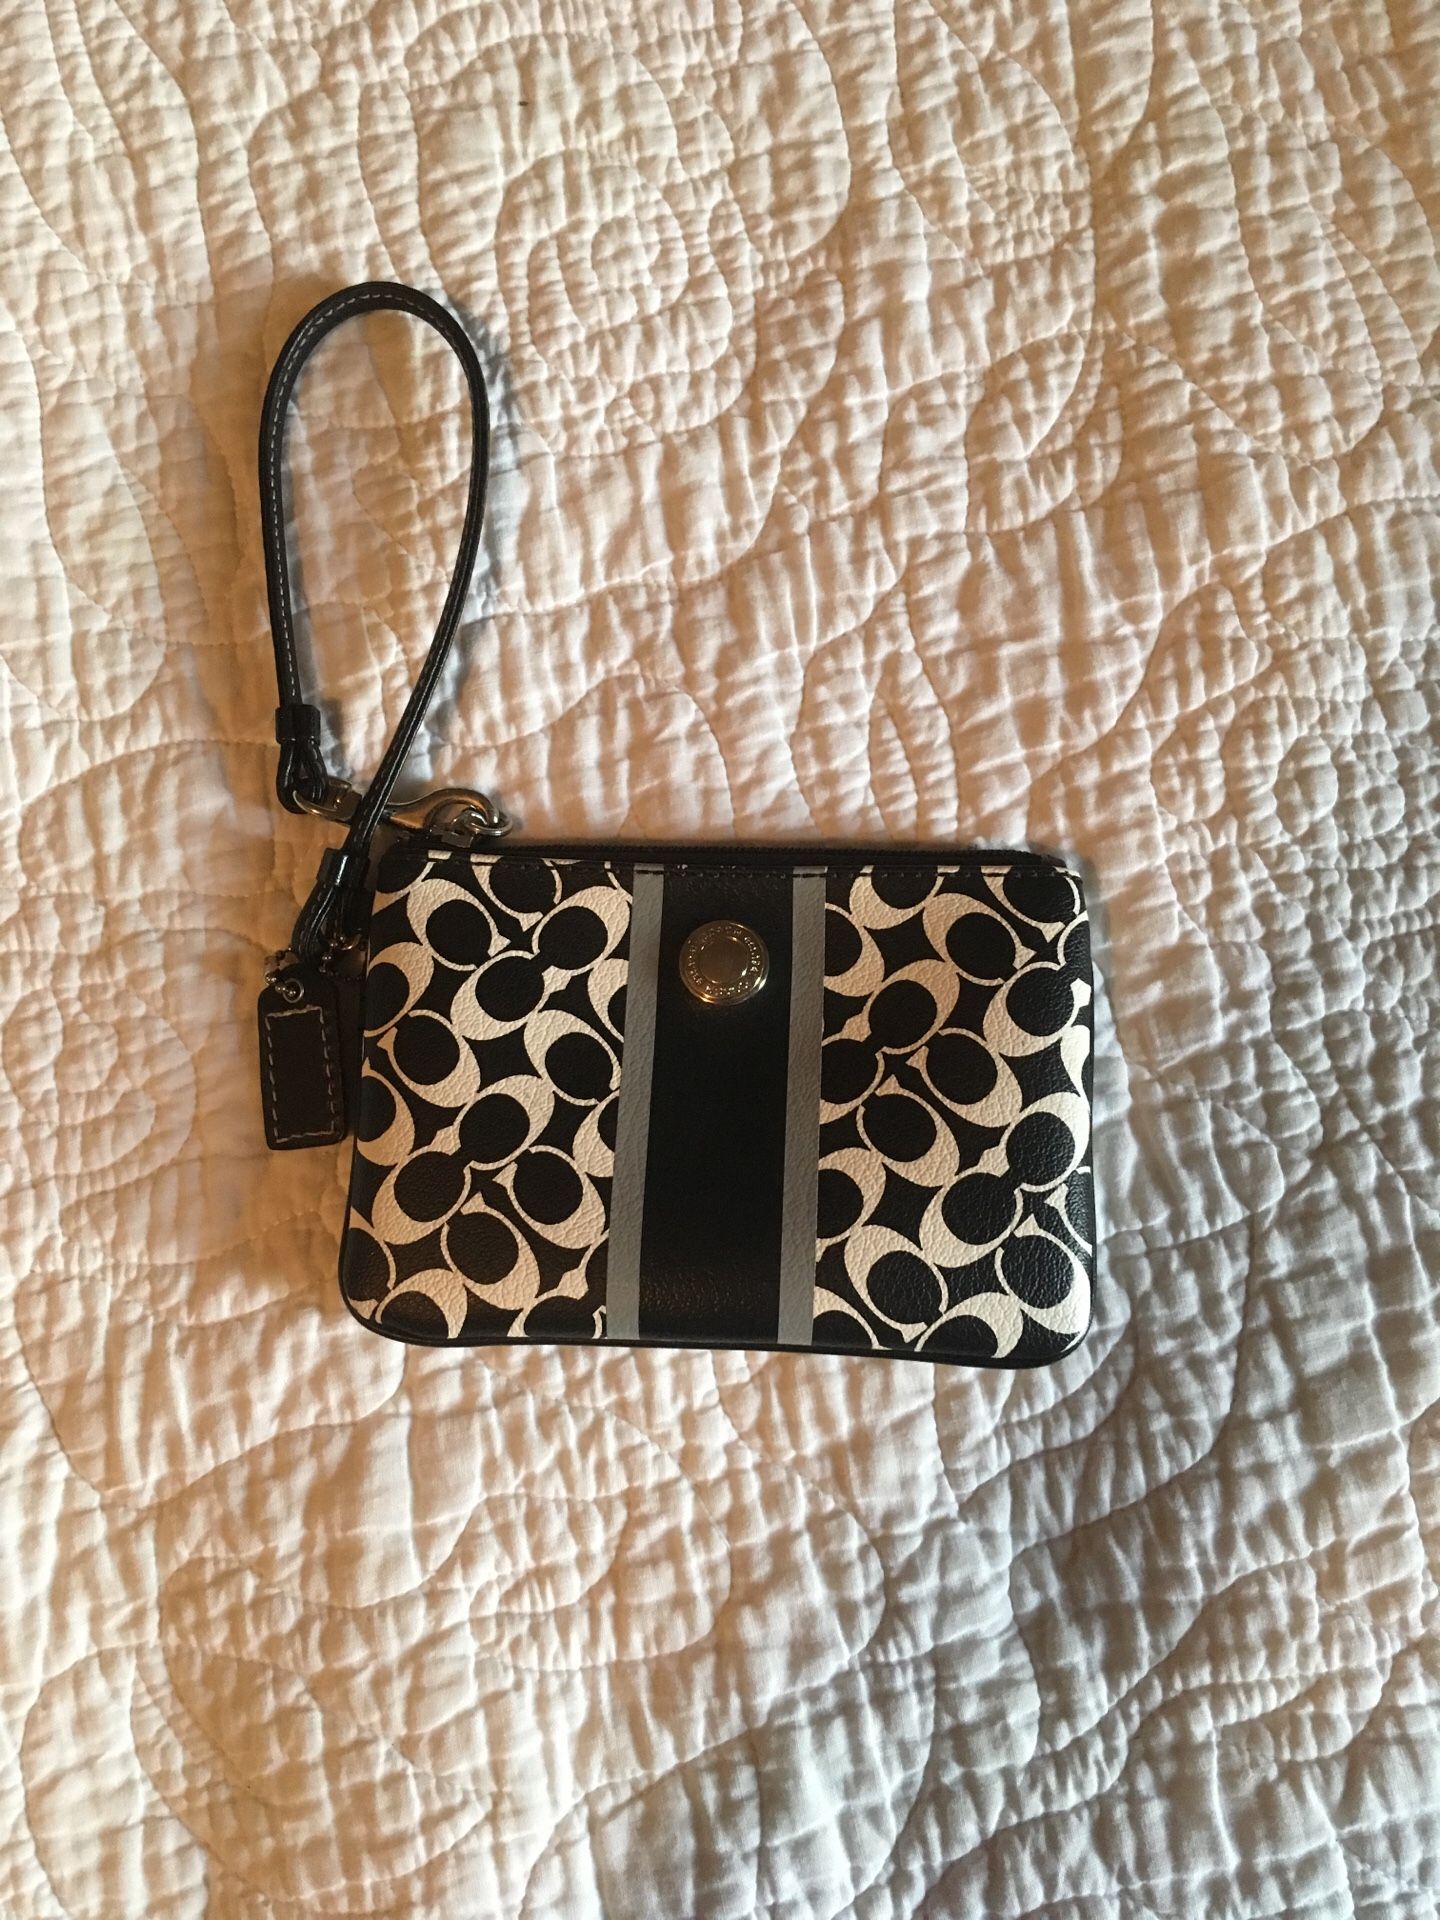 Coach wristlet! Only $20